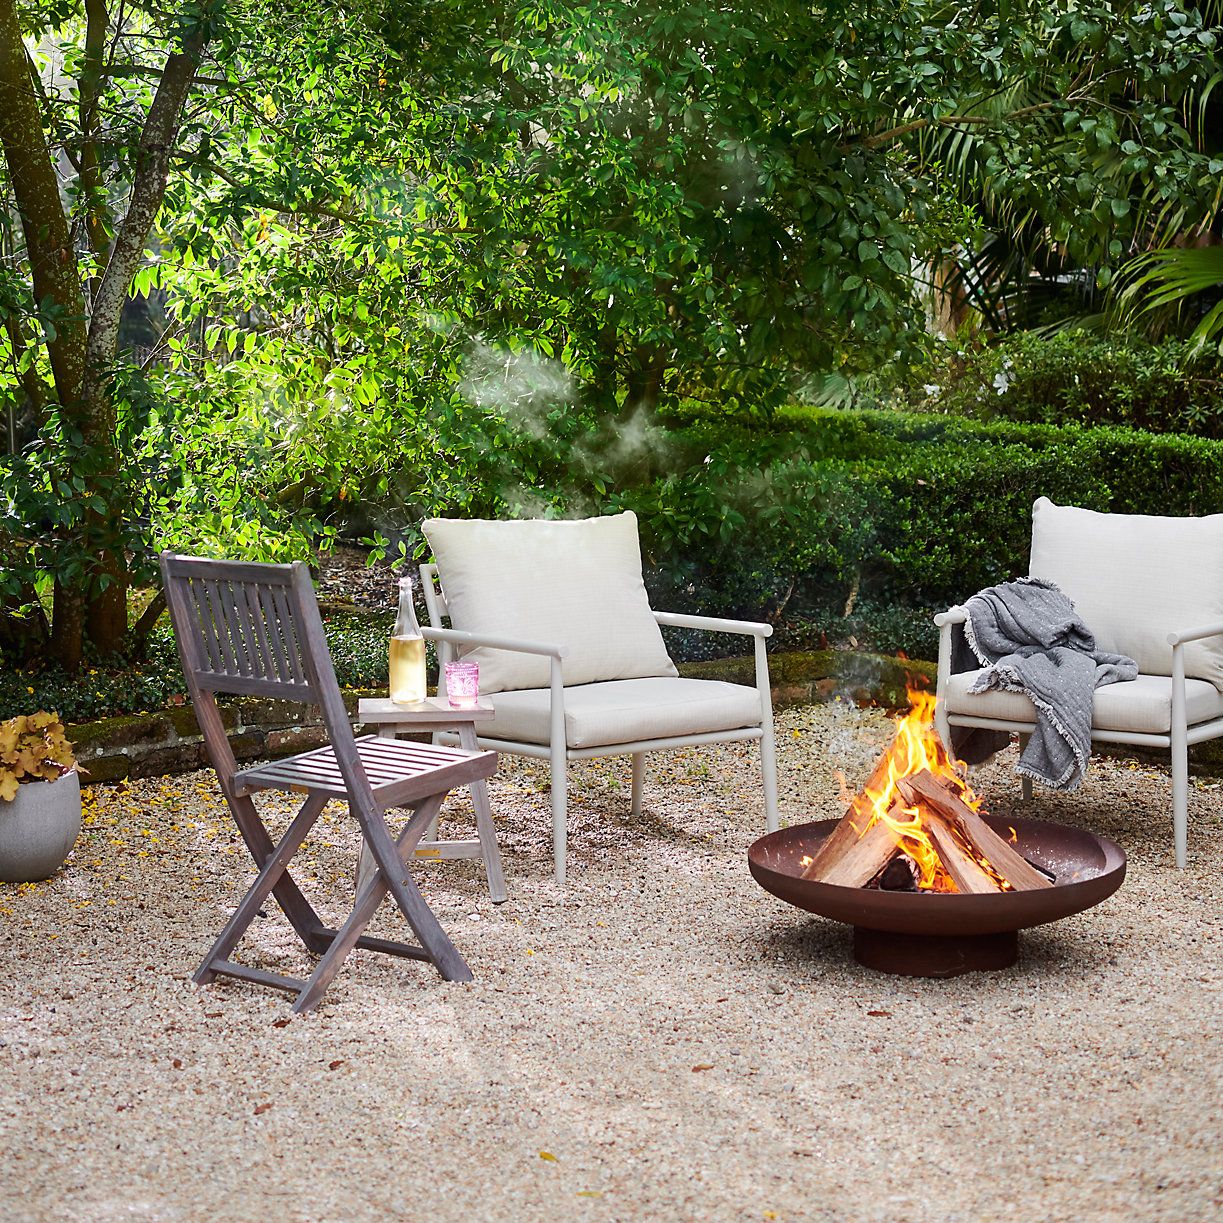 outdoor fire pit seating ideas 